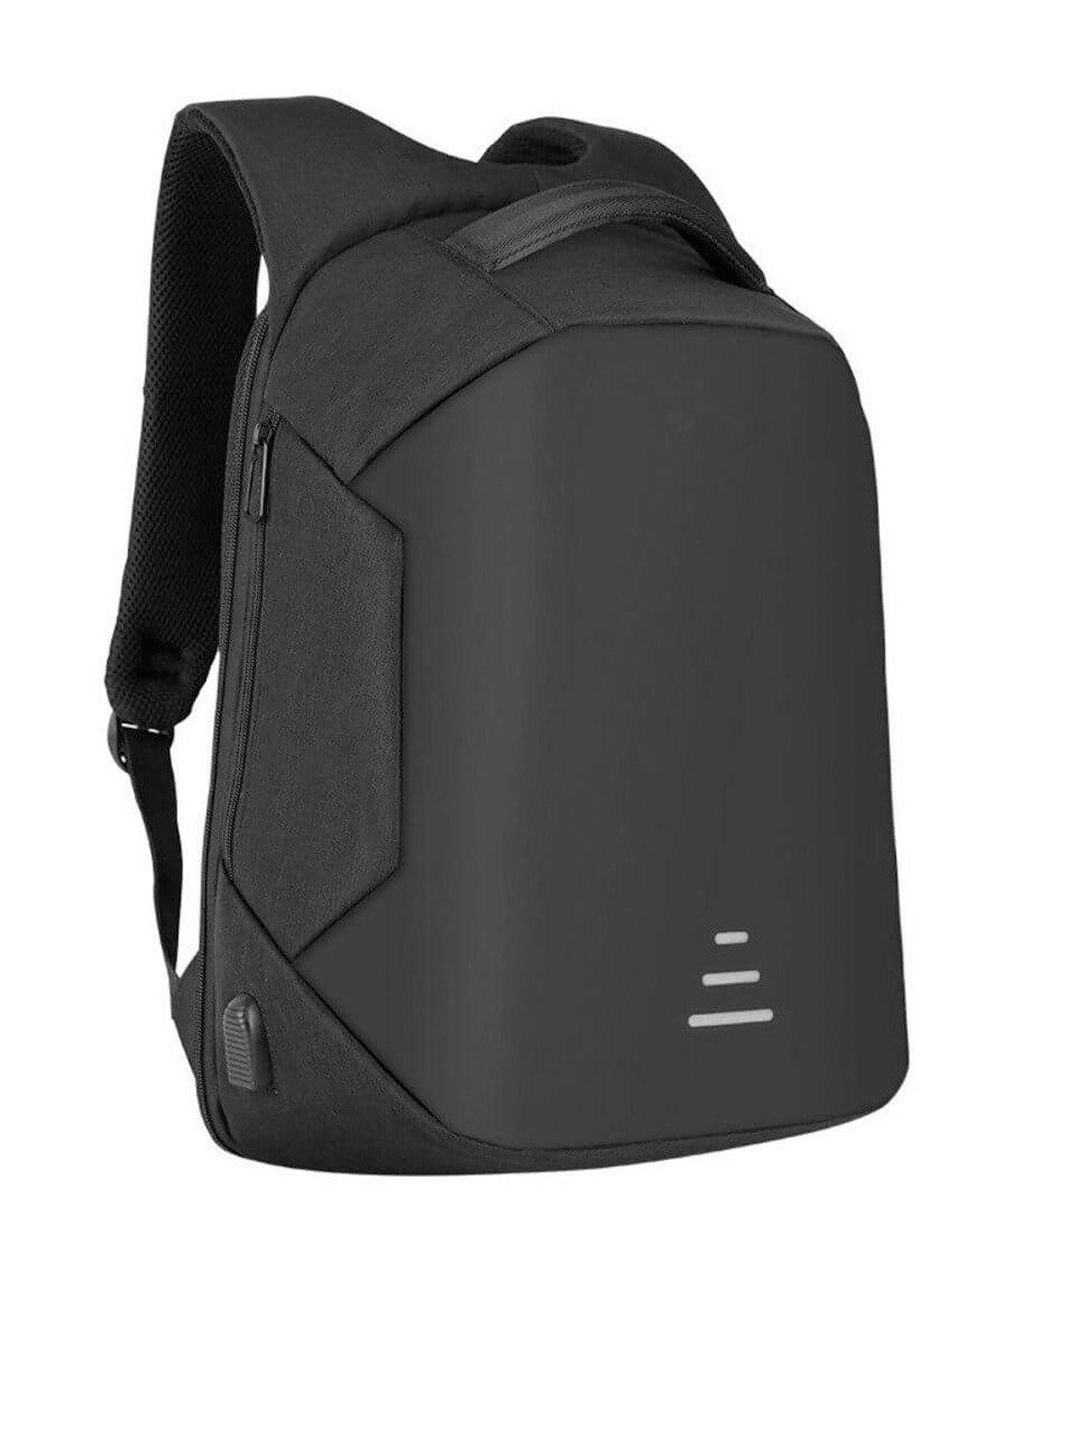 Awestuffs Unisex Black Solid Laptop Backpack with USB Charging Port Price in India